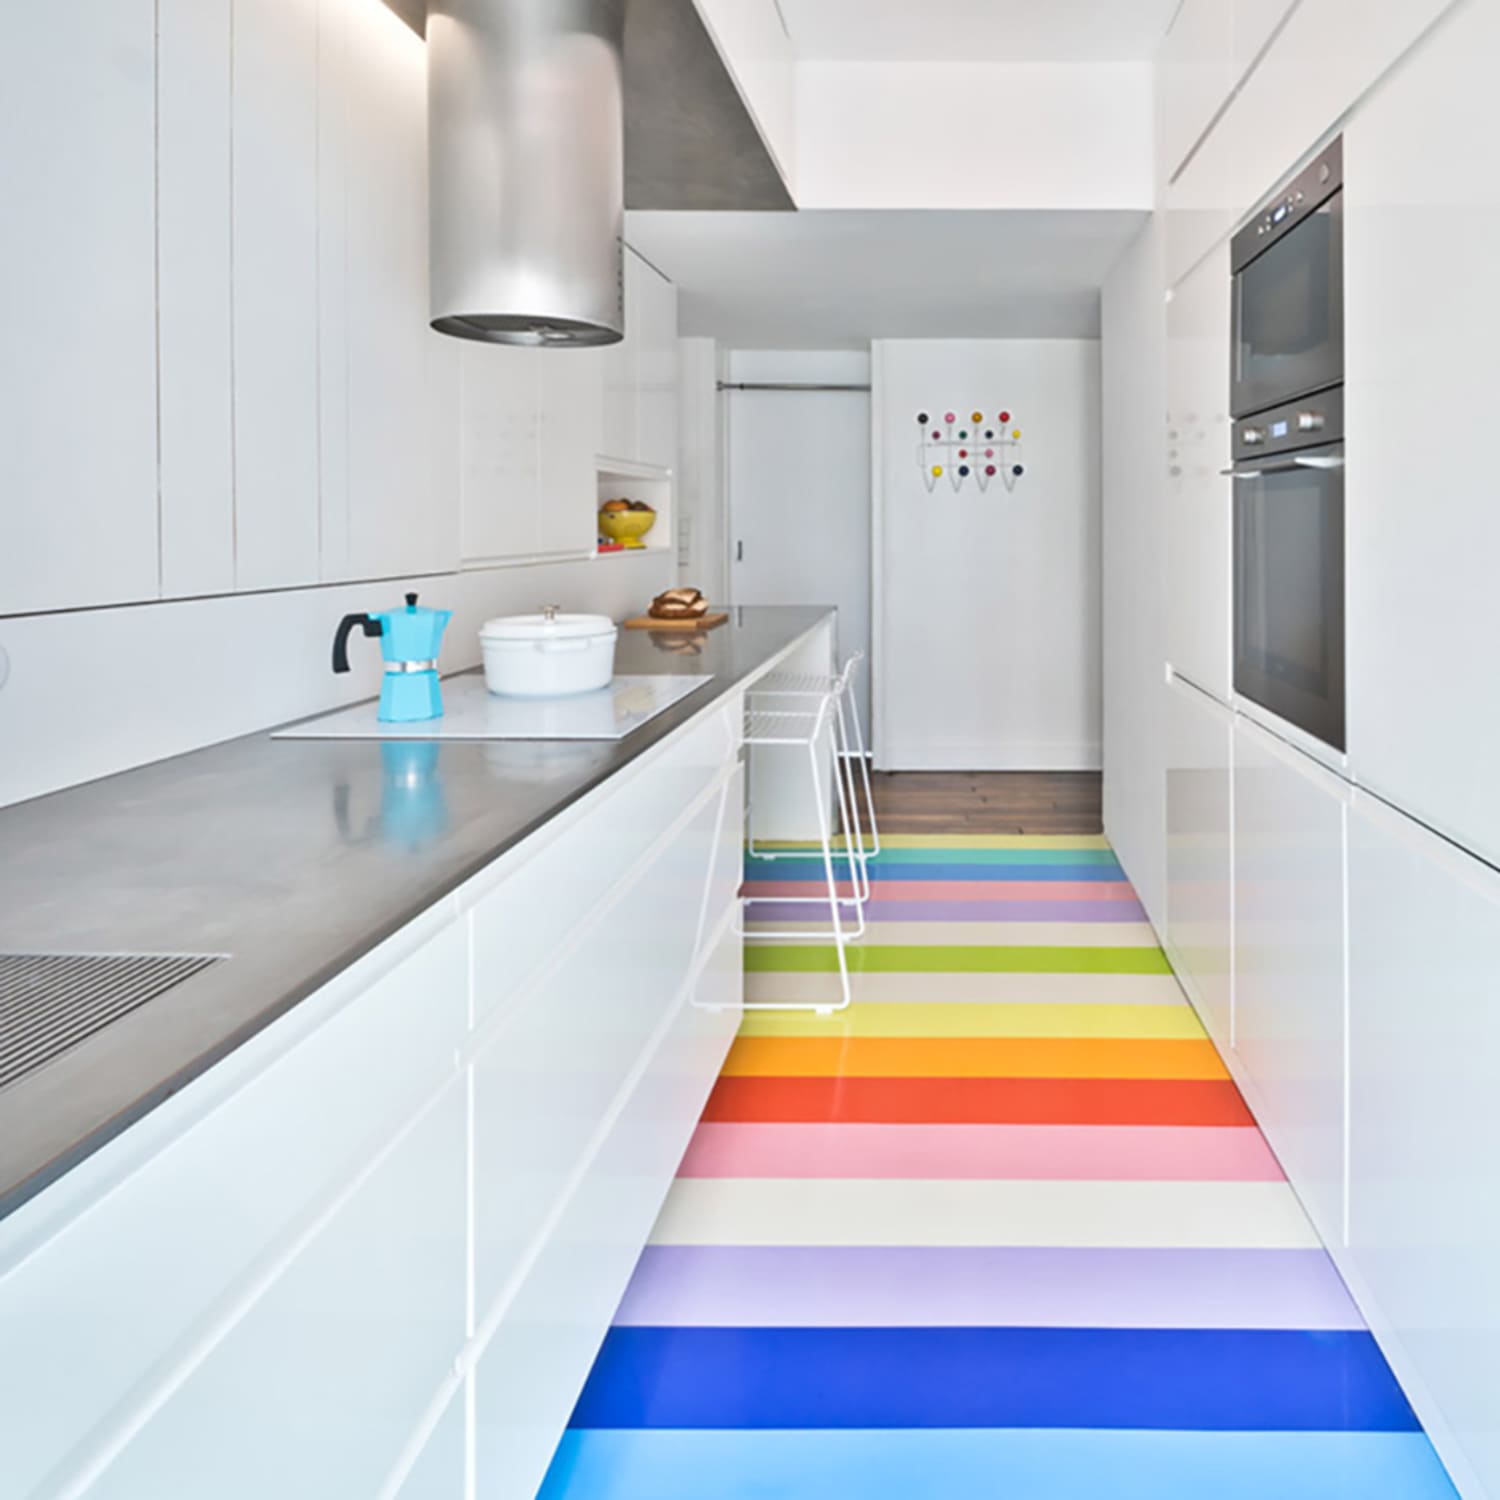 Perceptueel nicht Tram Why Rubber Floors Are Great For Kitchens and Bathrooms | Apartment Therapy